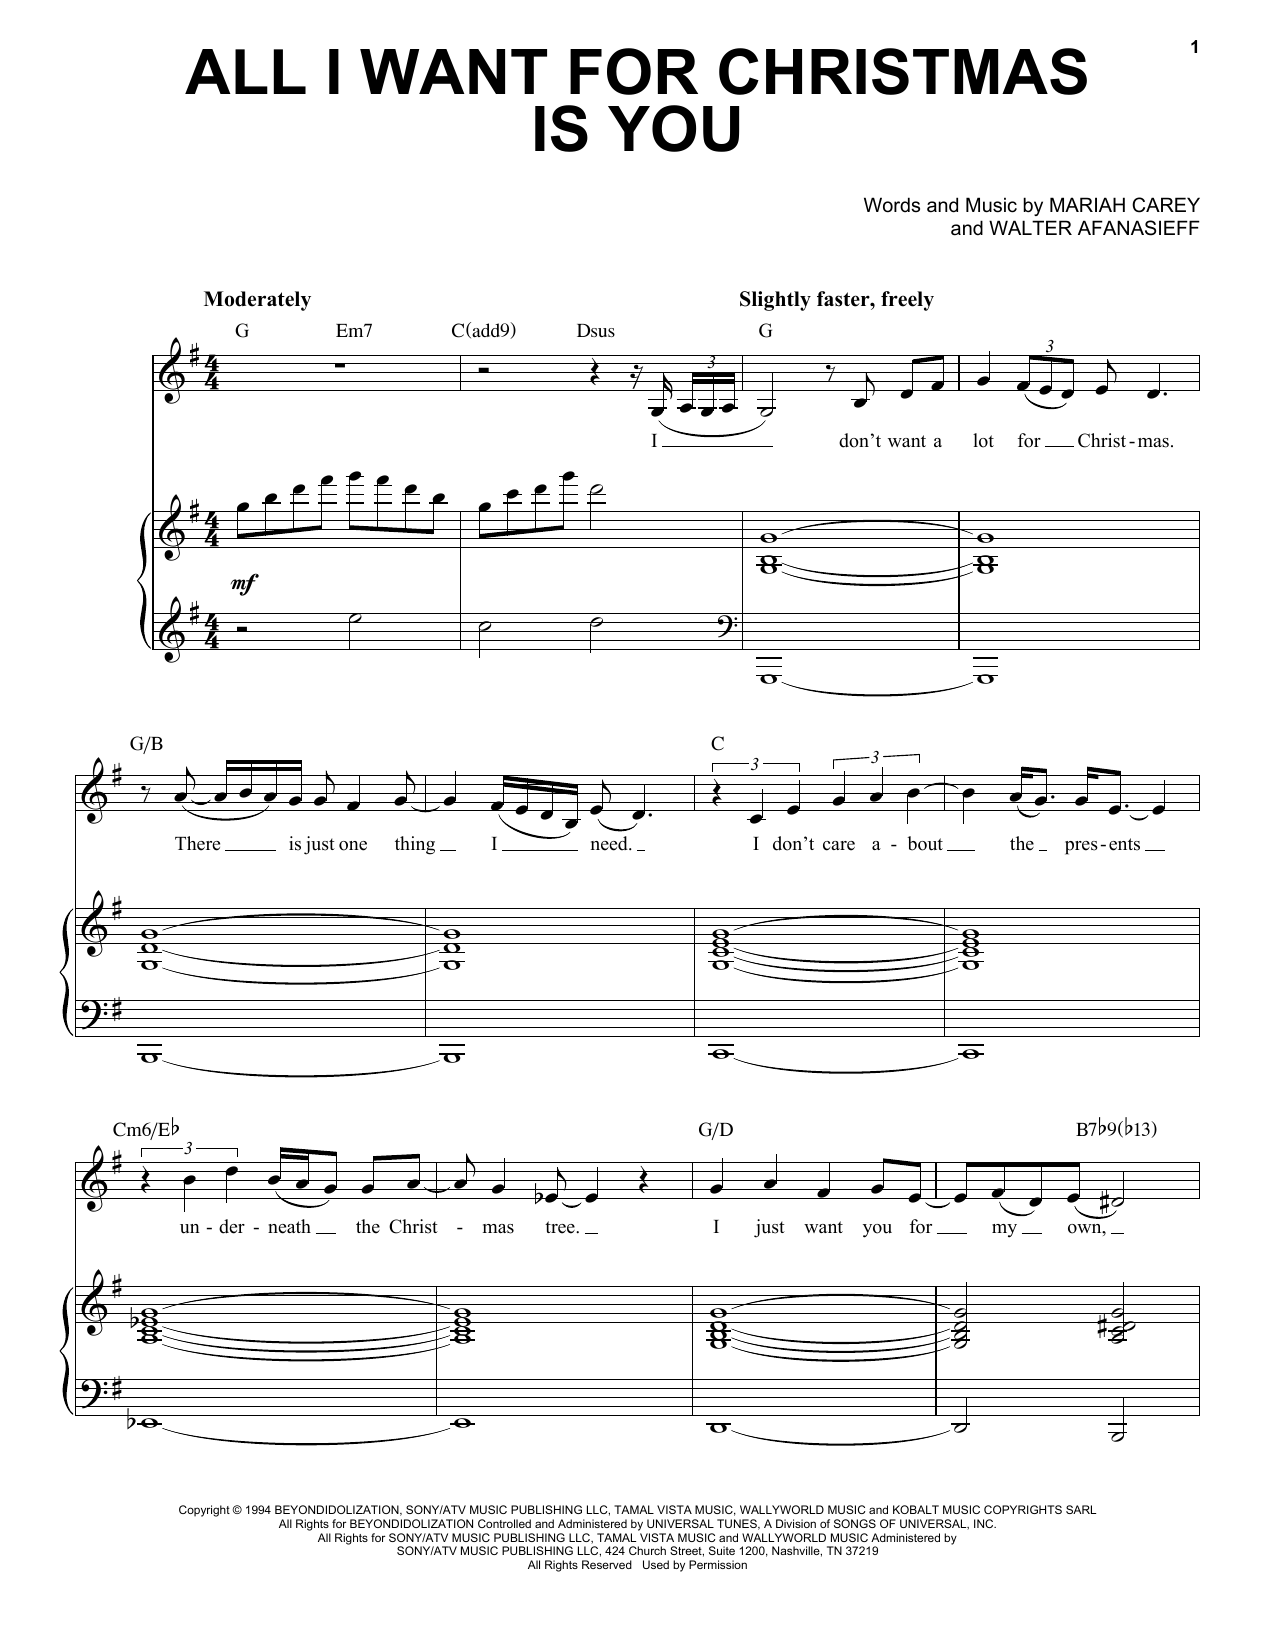 Download Mariah Carey All I Want For Christmas Is You Sheet Music